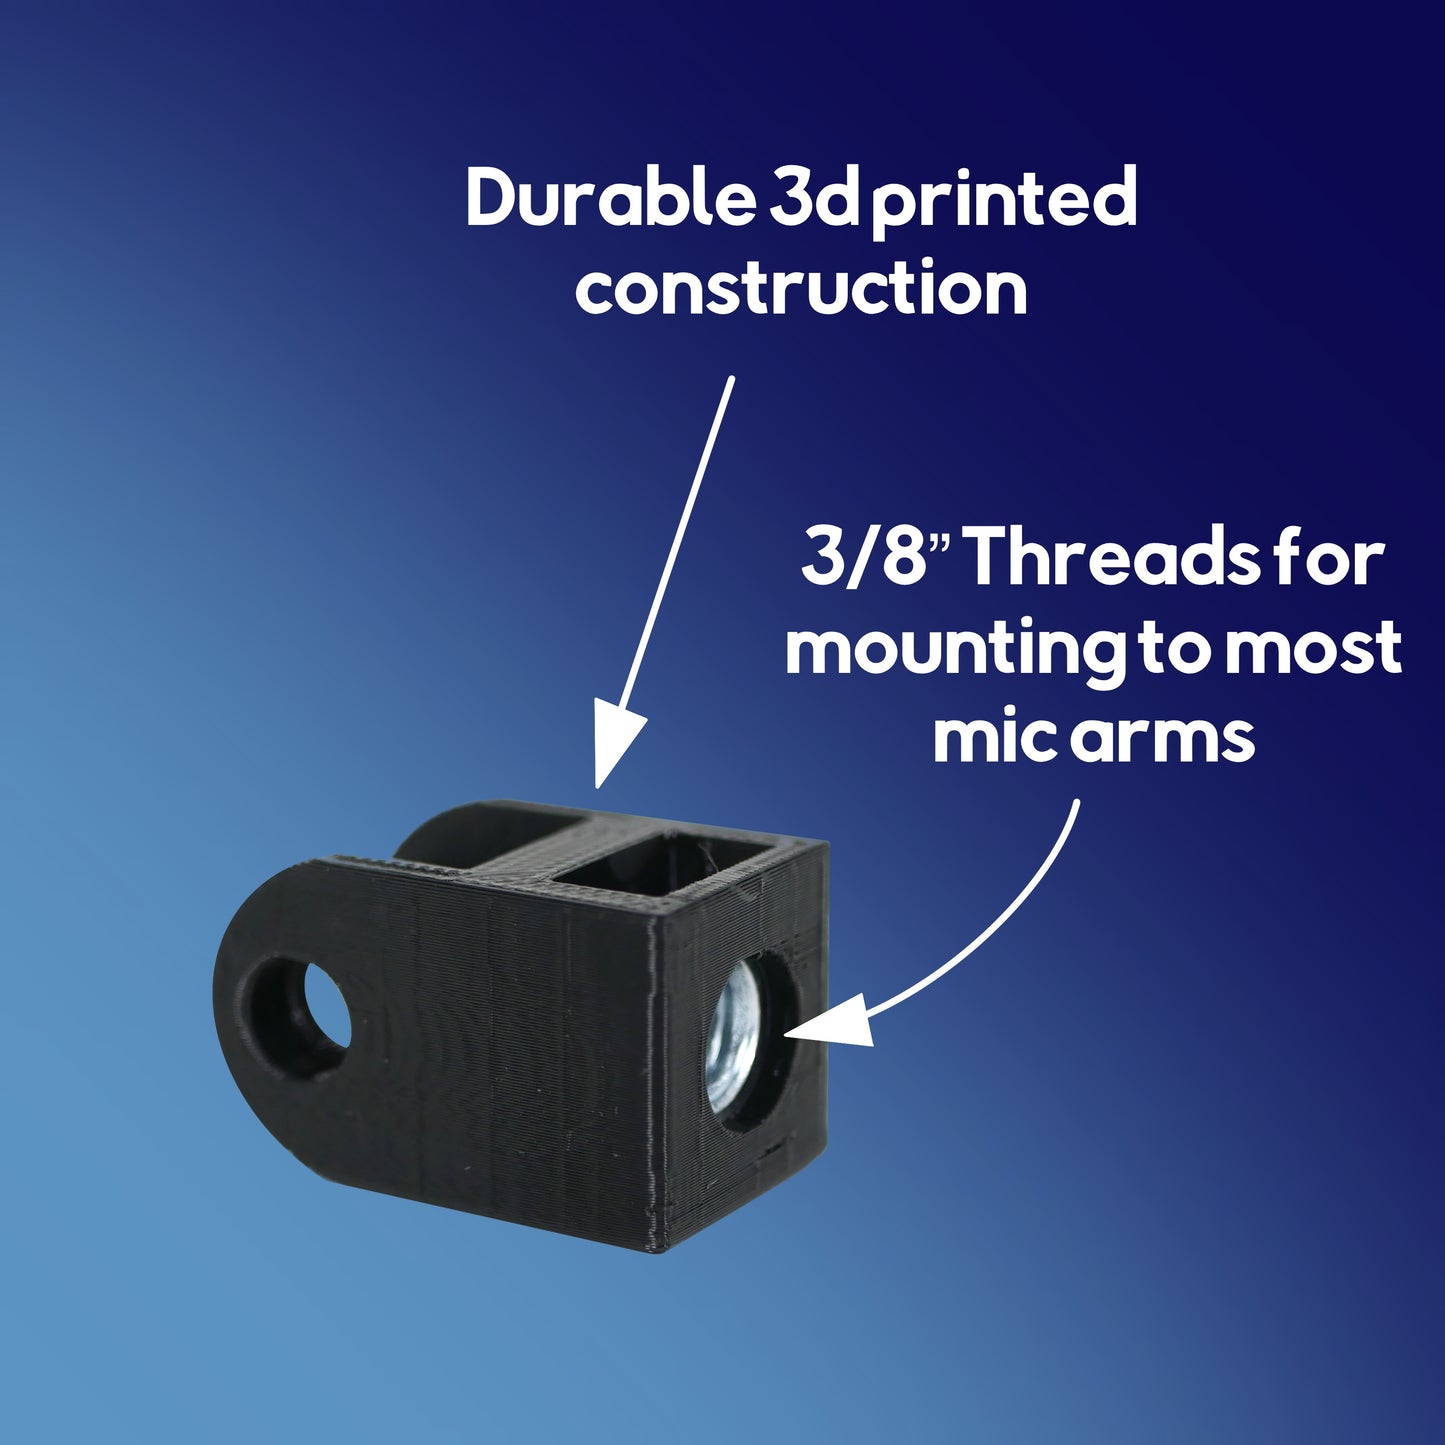 An infographic for the HyperX QuadCast microphone mount adapter.